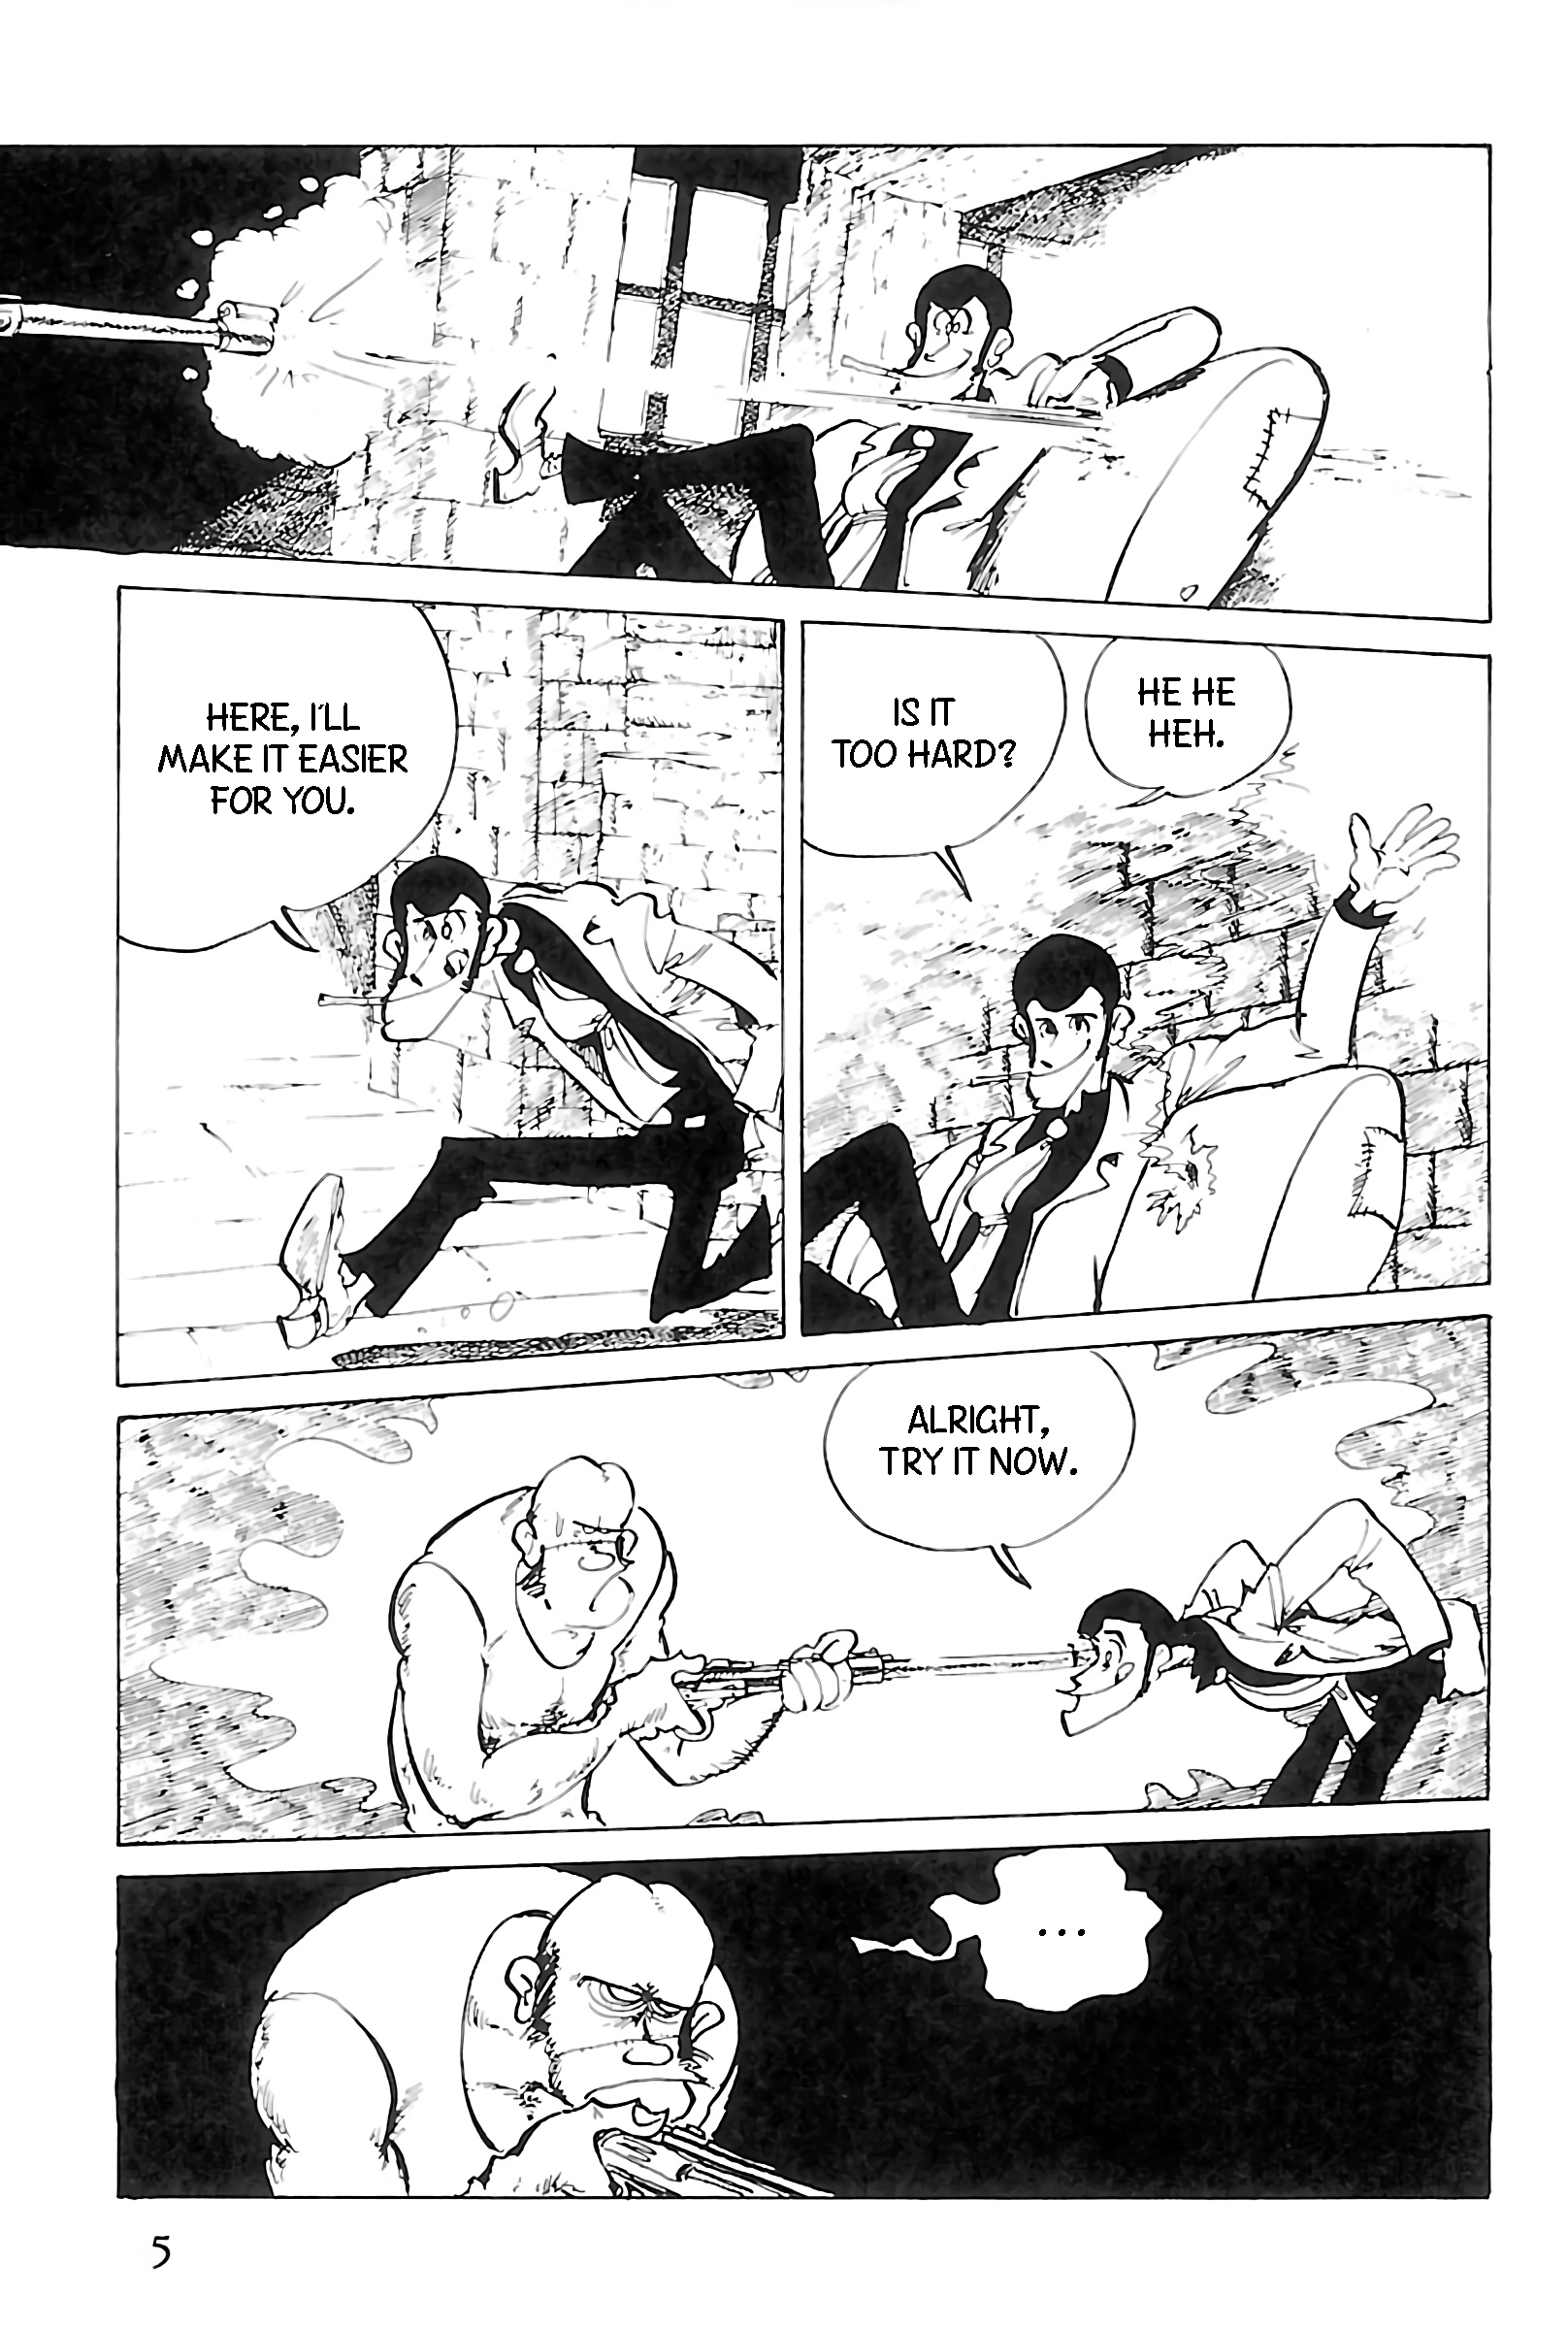 Lupin Iii: World’S Most Wanted - Page 3